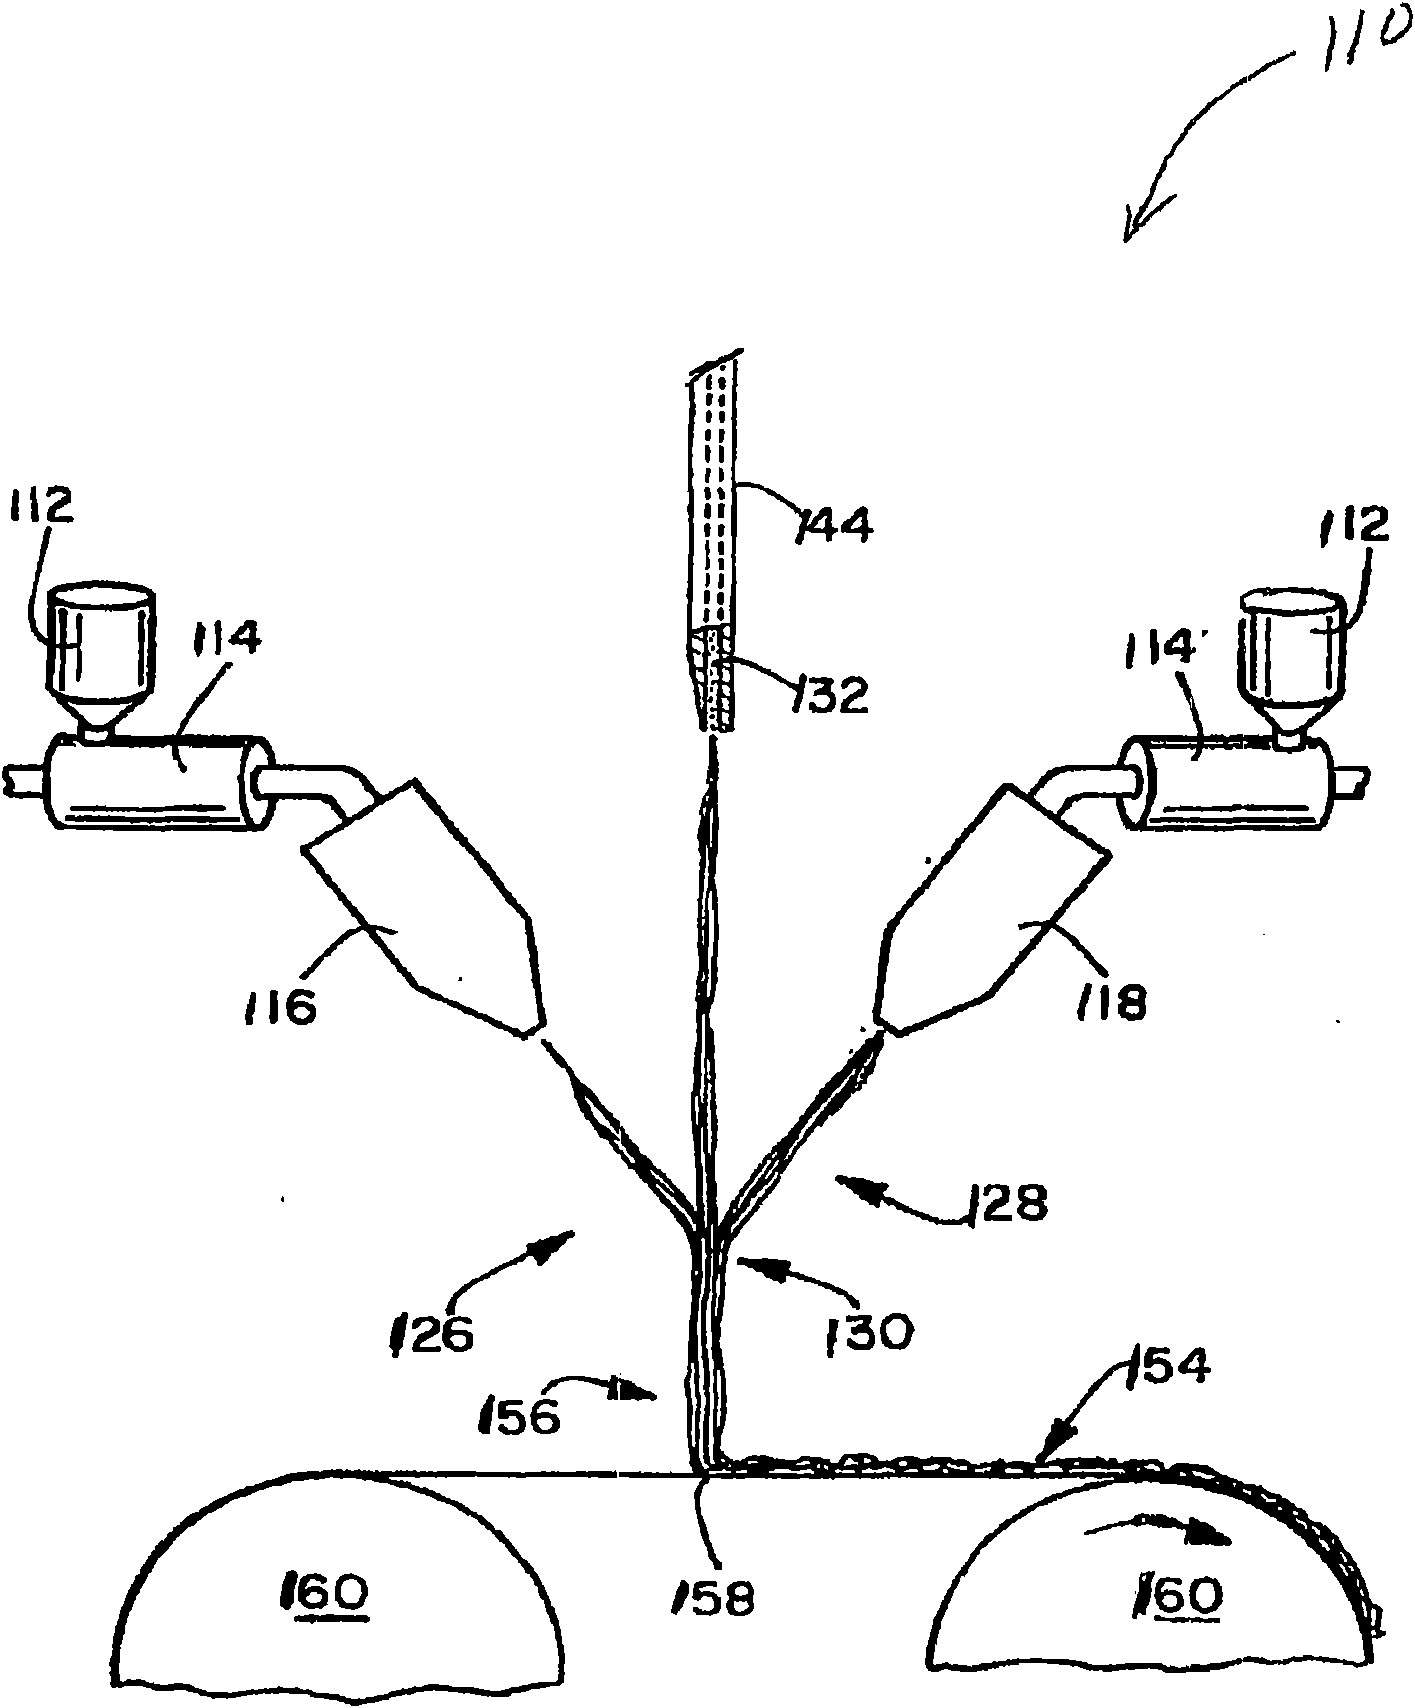 Biodegradable polyesters for use in forming fibers